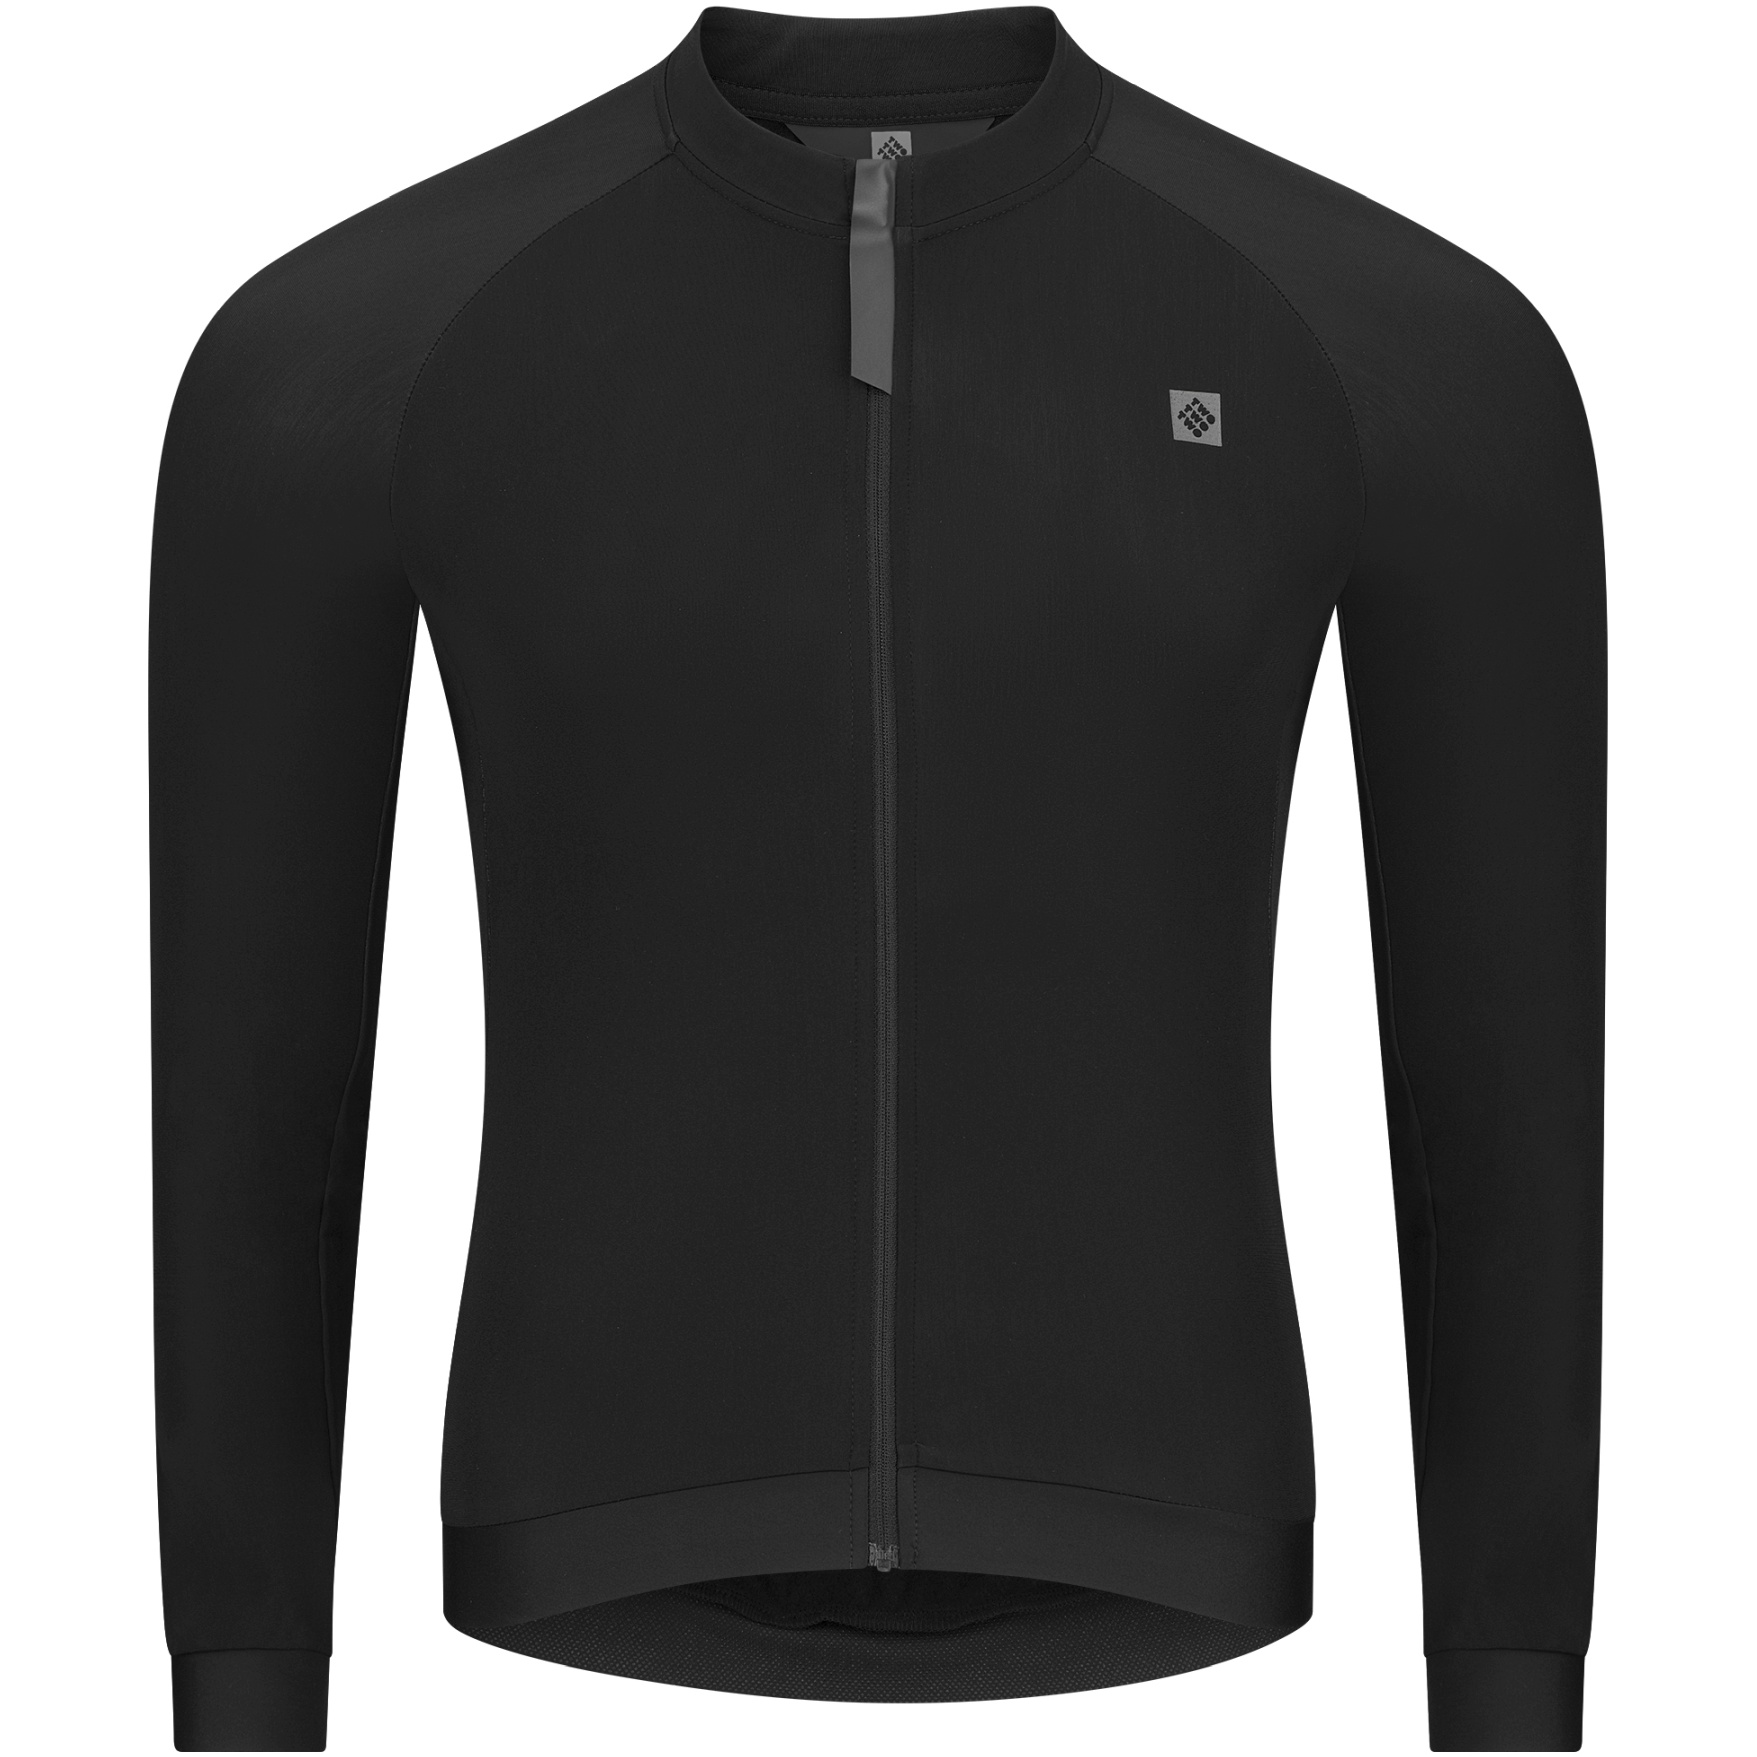 Picture of triple2 Velozip LS Pro Jersey - moonless night